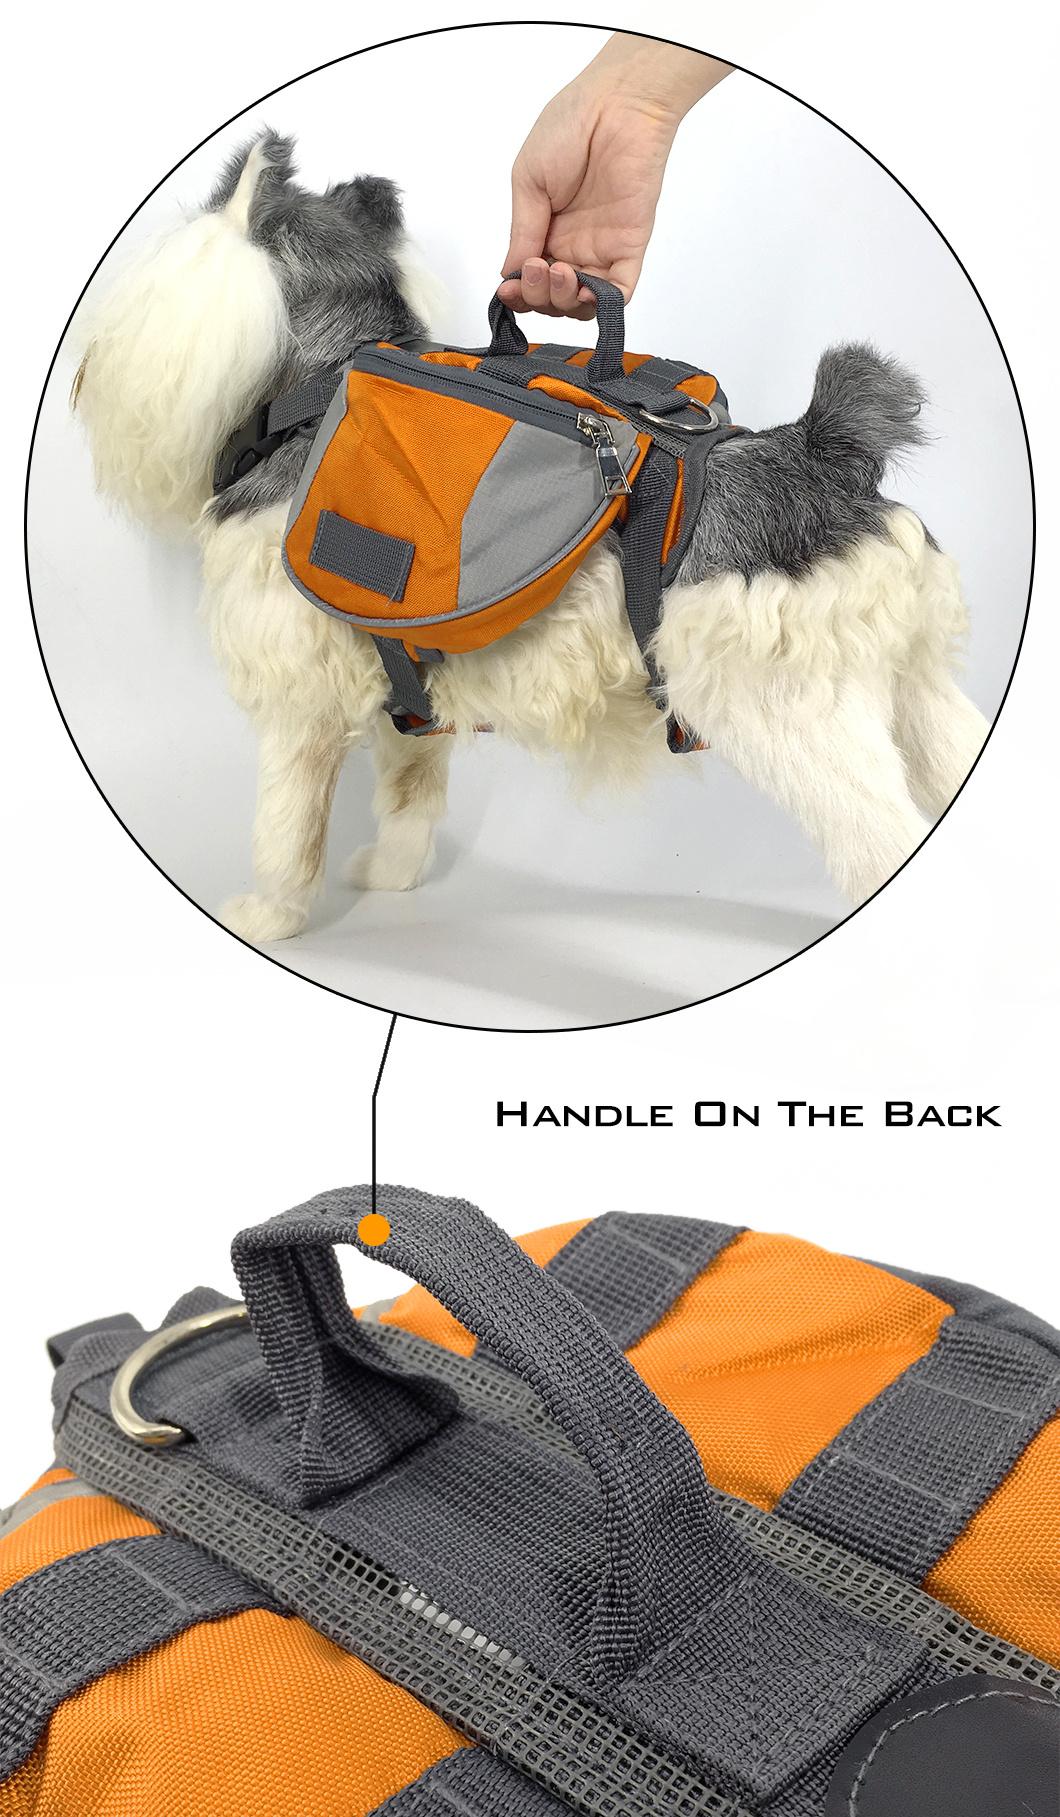 Fashionable Outdoor Travel Hiking Reflective Dog Backpack Pet Products